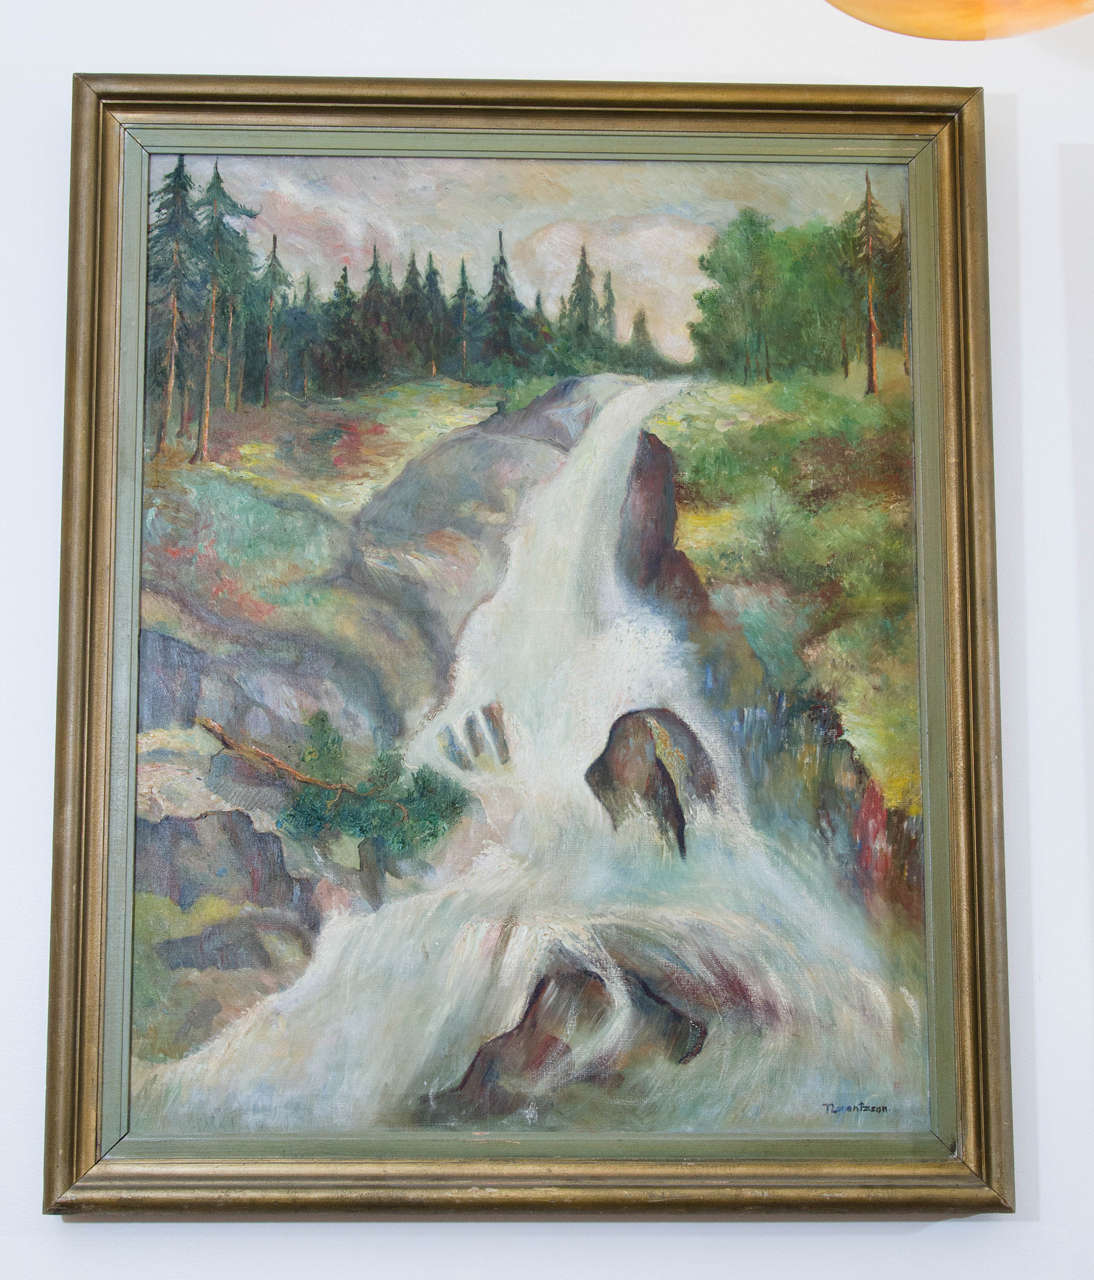 More peaceful than a feng shui fountain, this post-impressionist oil on canvas shows a stunningly normal scene from the Swedish forest. Stands of linden trees, fir and aspen frame a brook created from melting snow, forming a waterfall you can almost